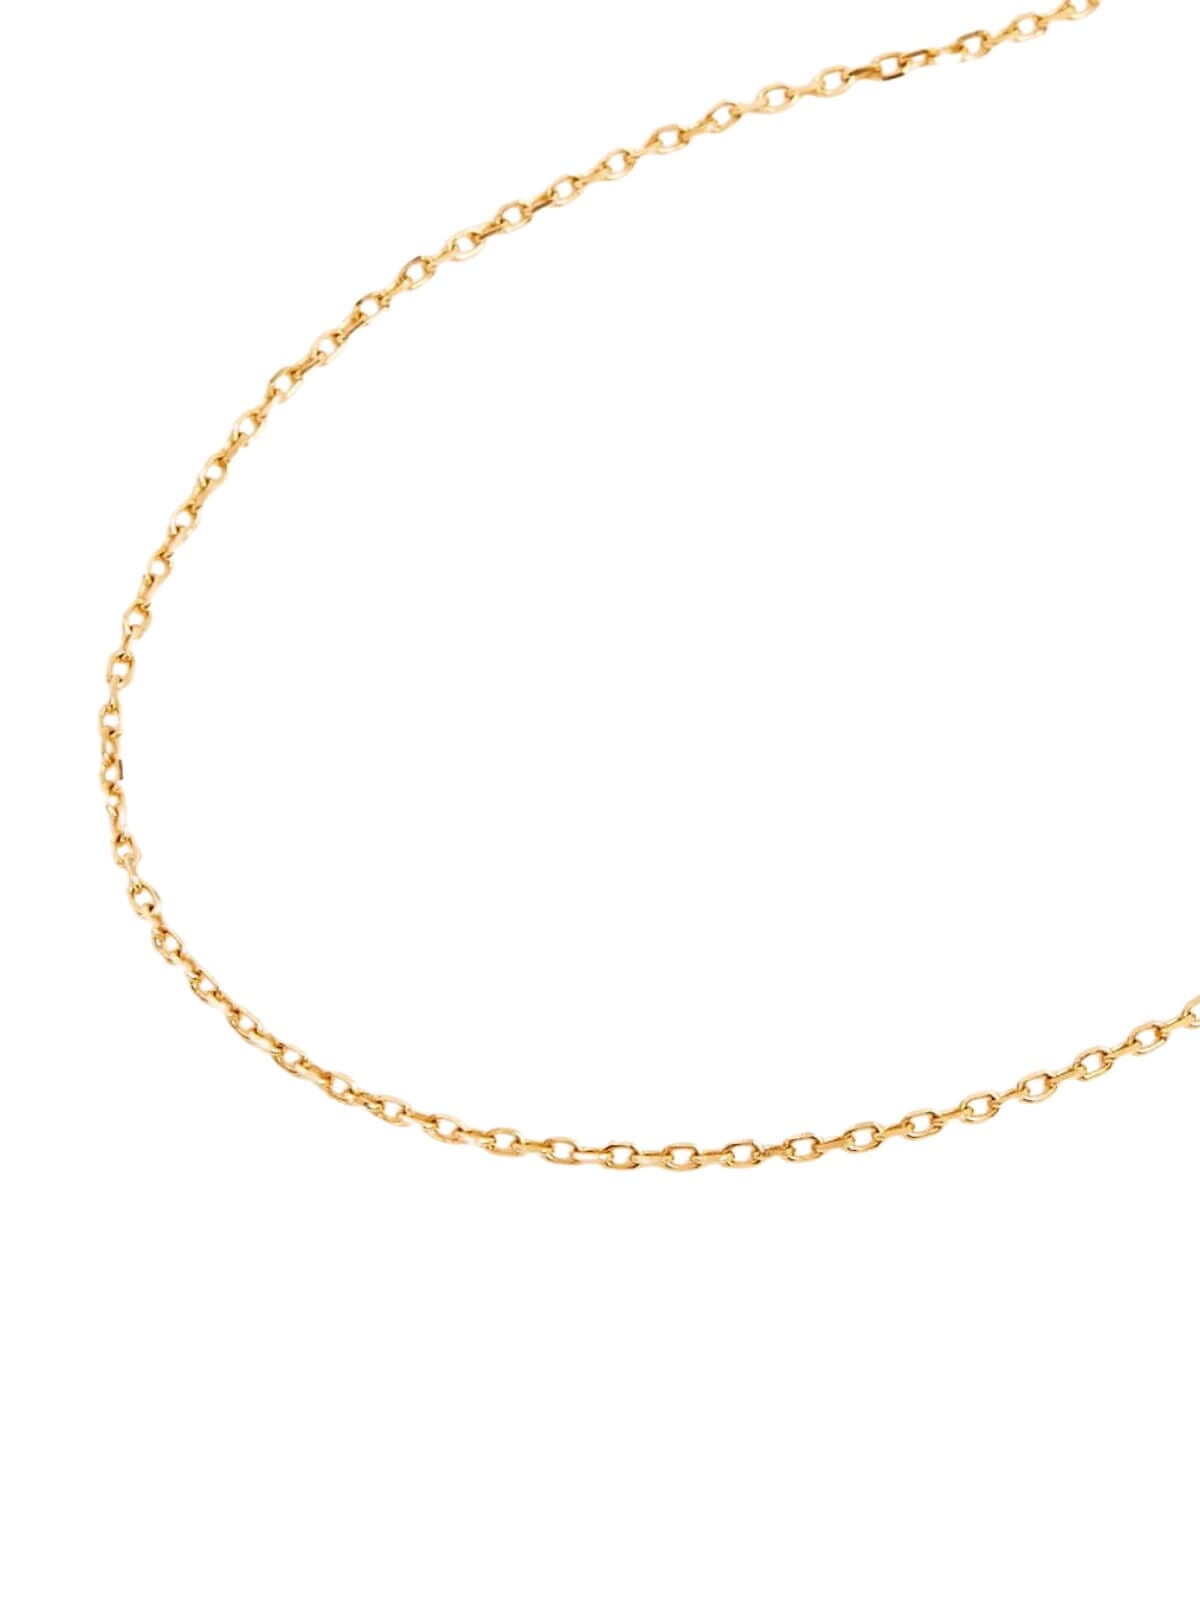 By Charlotte | 21" Signature Chain Necklace | Perlu